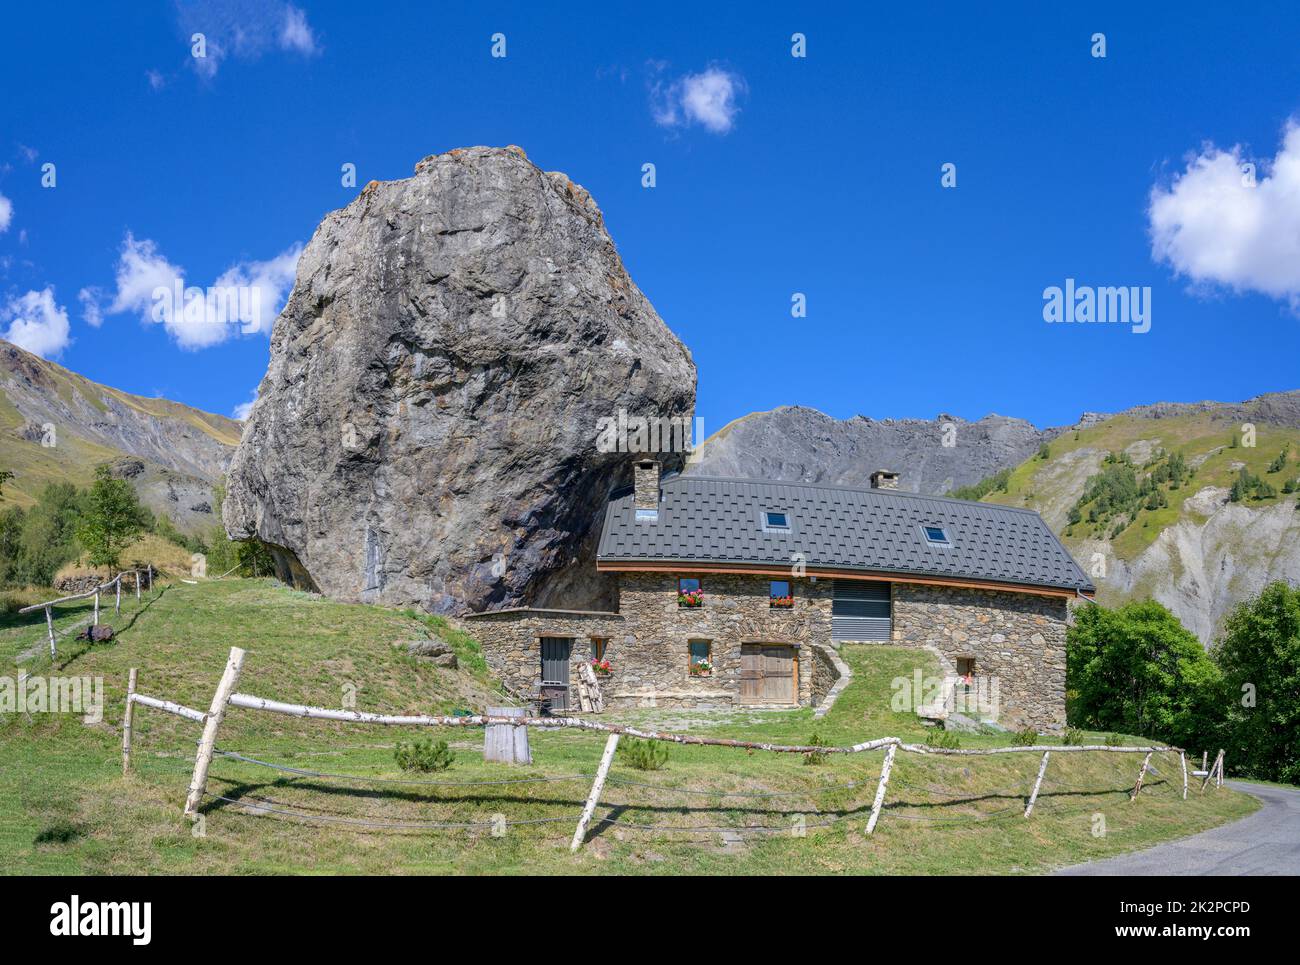 An unusual house location in the Ferrand Valley on the Col de la Sarenne, Stock Photo